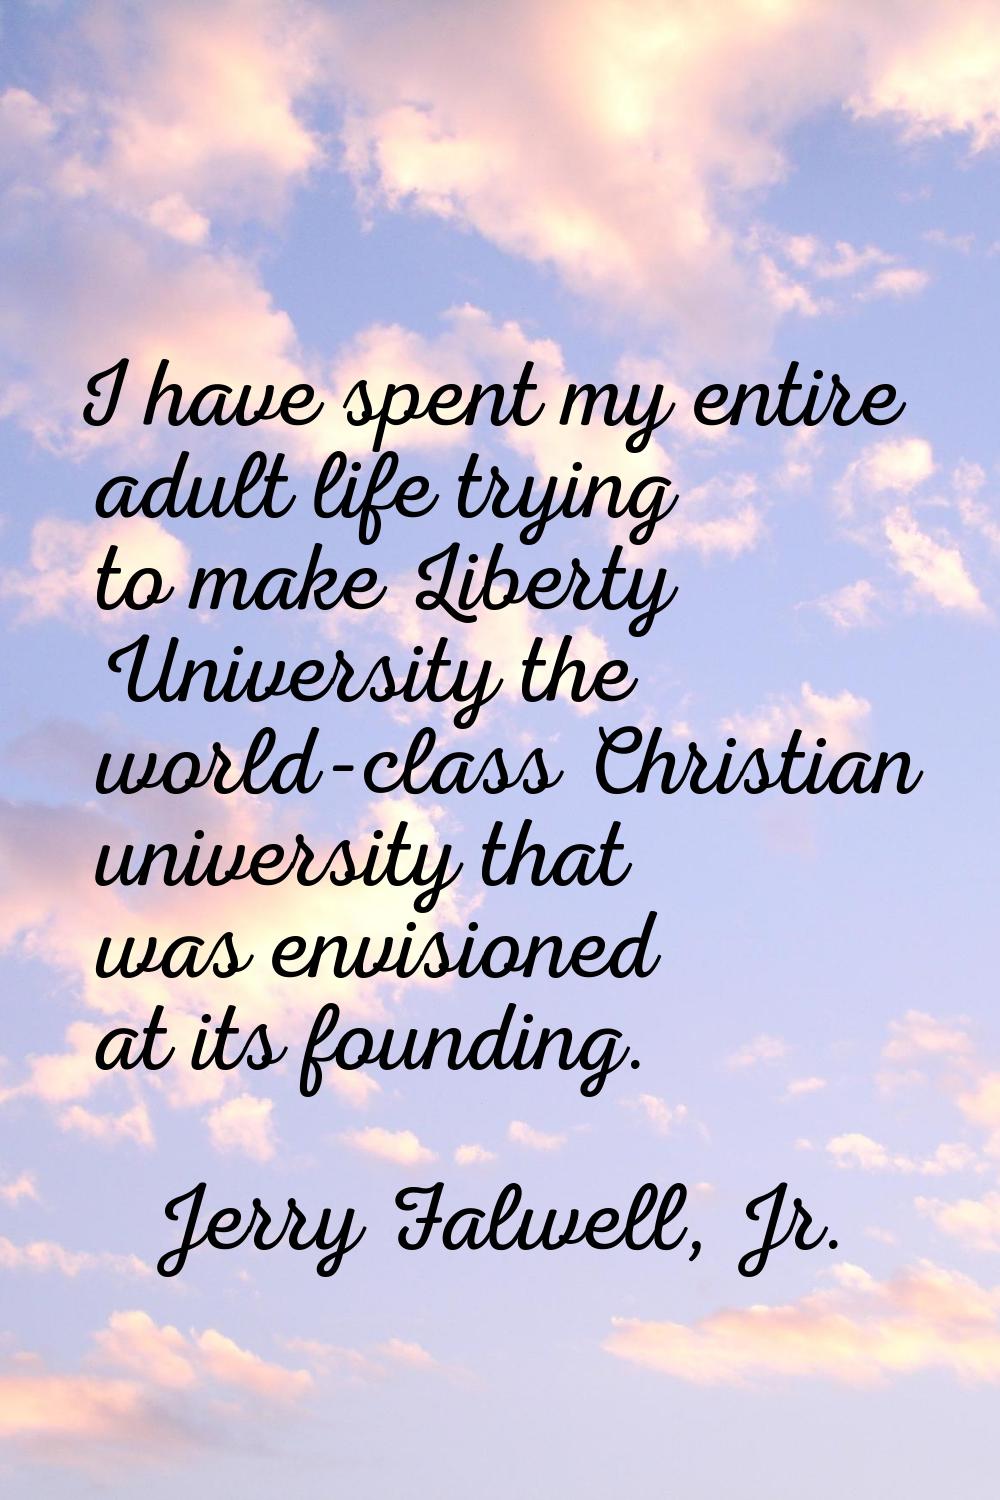 I have spent my entire adult life trying to make Liberty University the world-class Christian unive